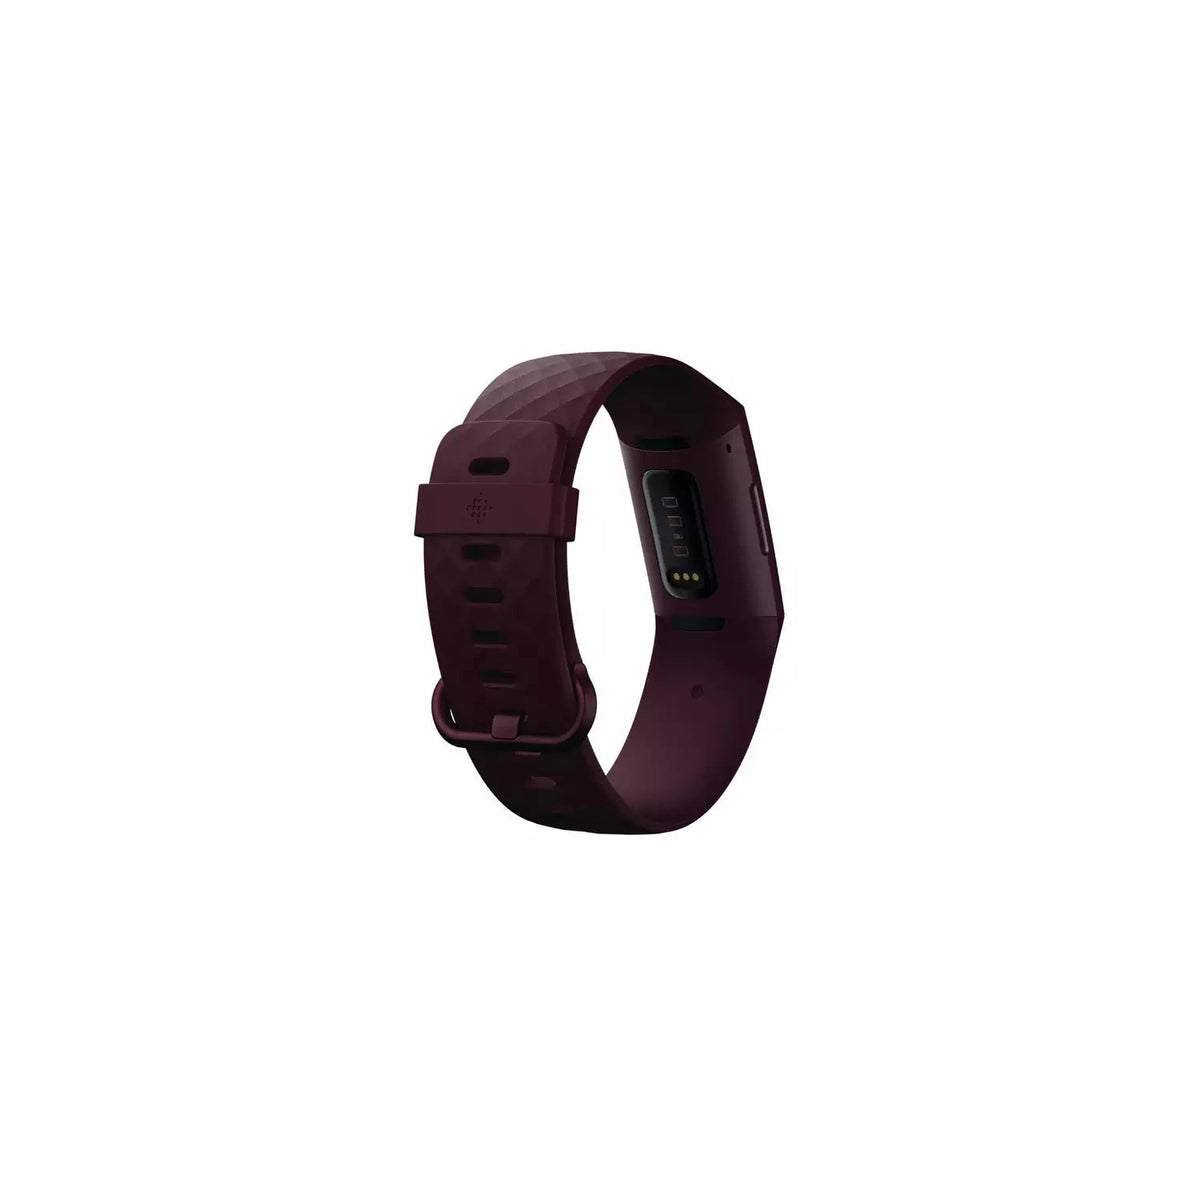 Fitbit Charge 4 Advanced Fitness Tracker with GPS - Rosewood - Refurbished Pristine